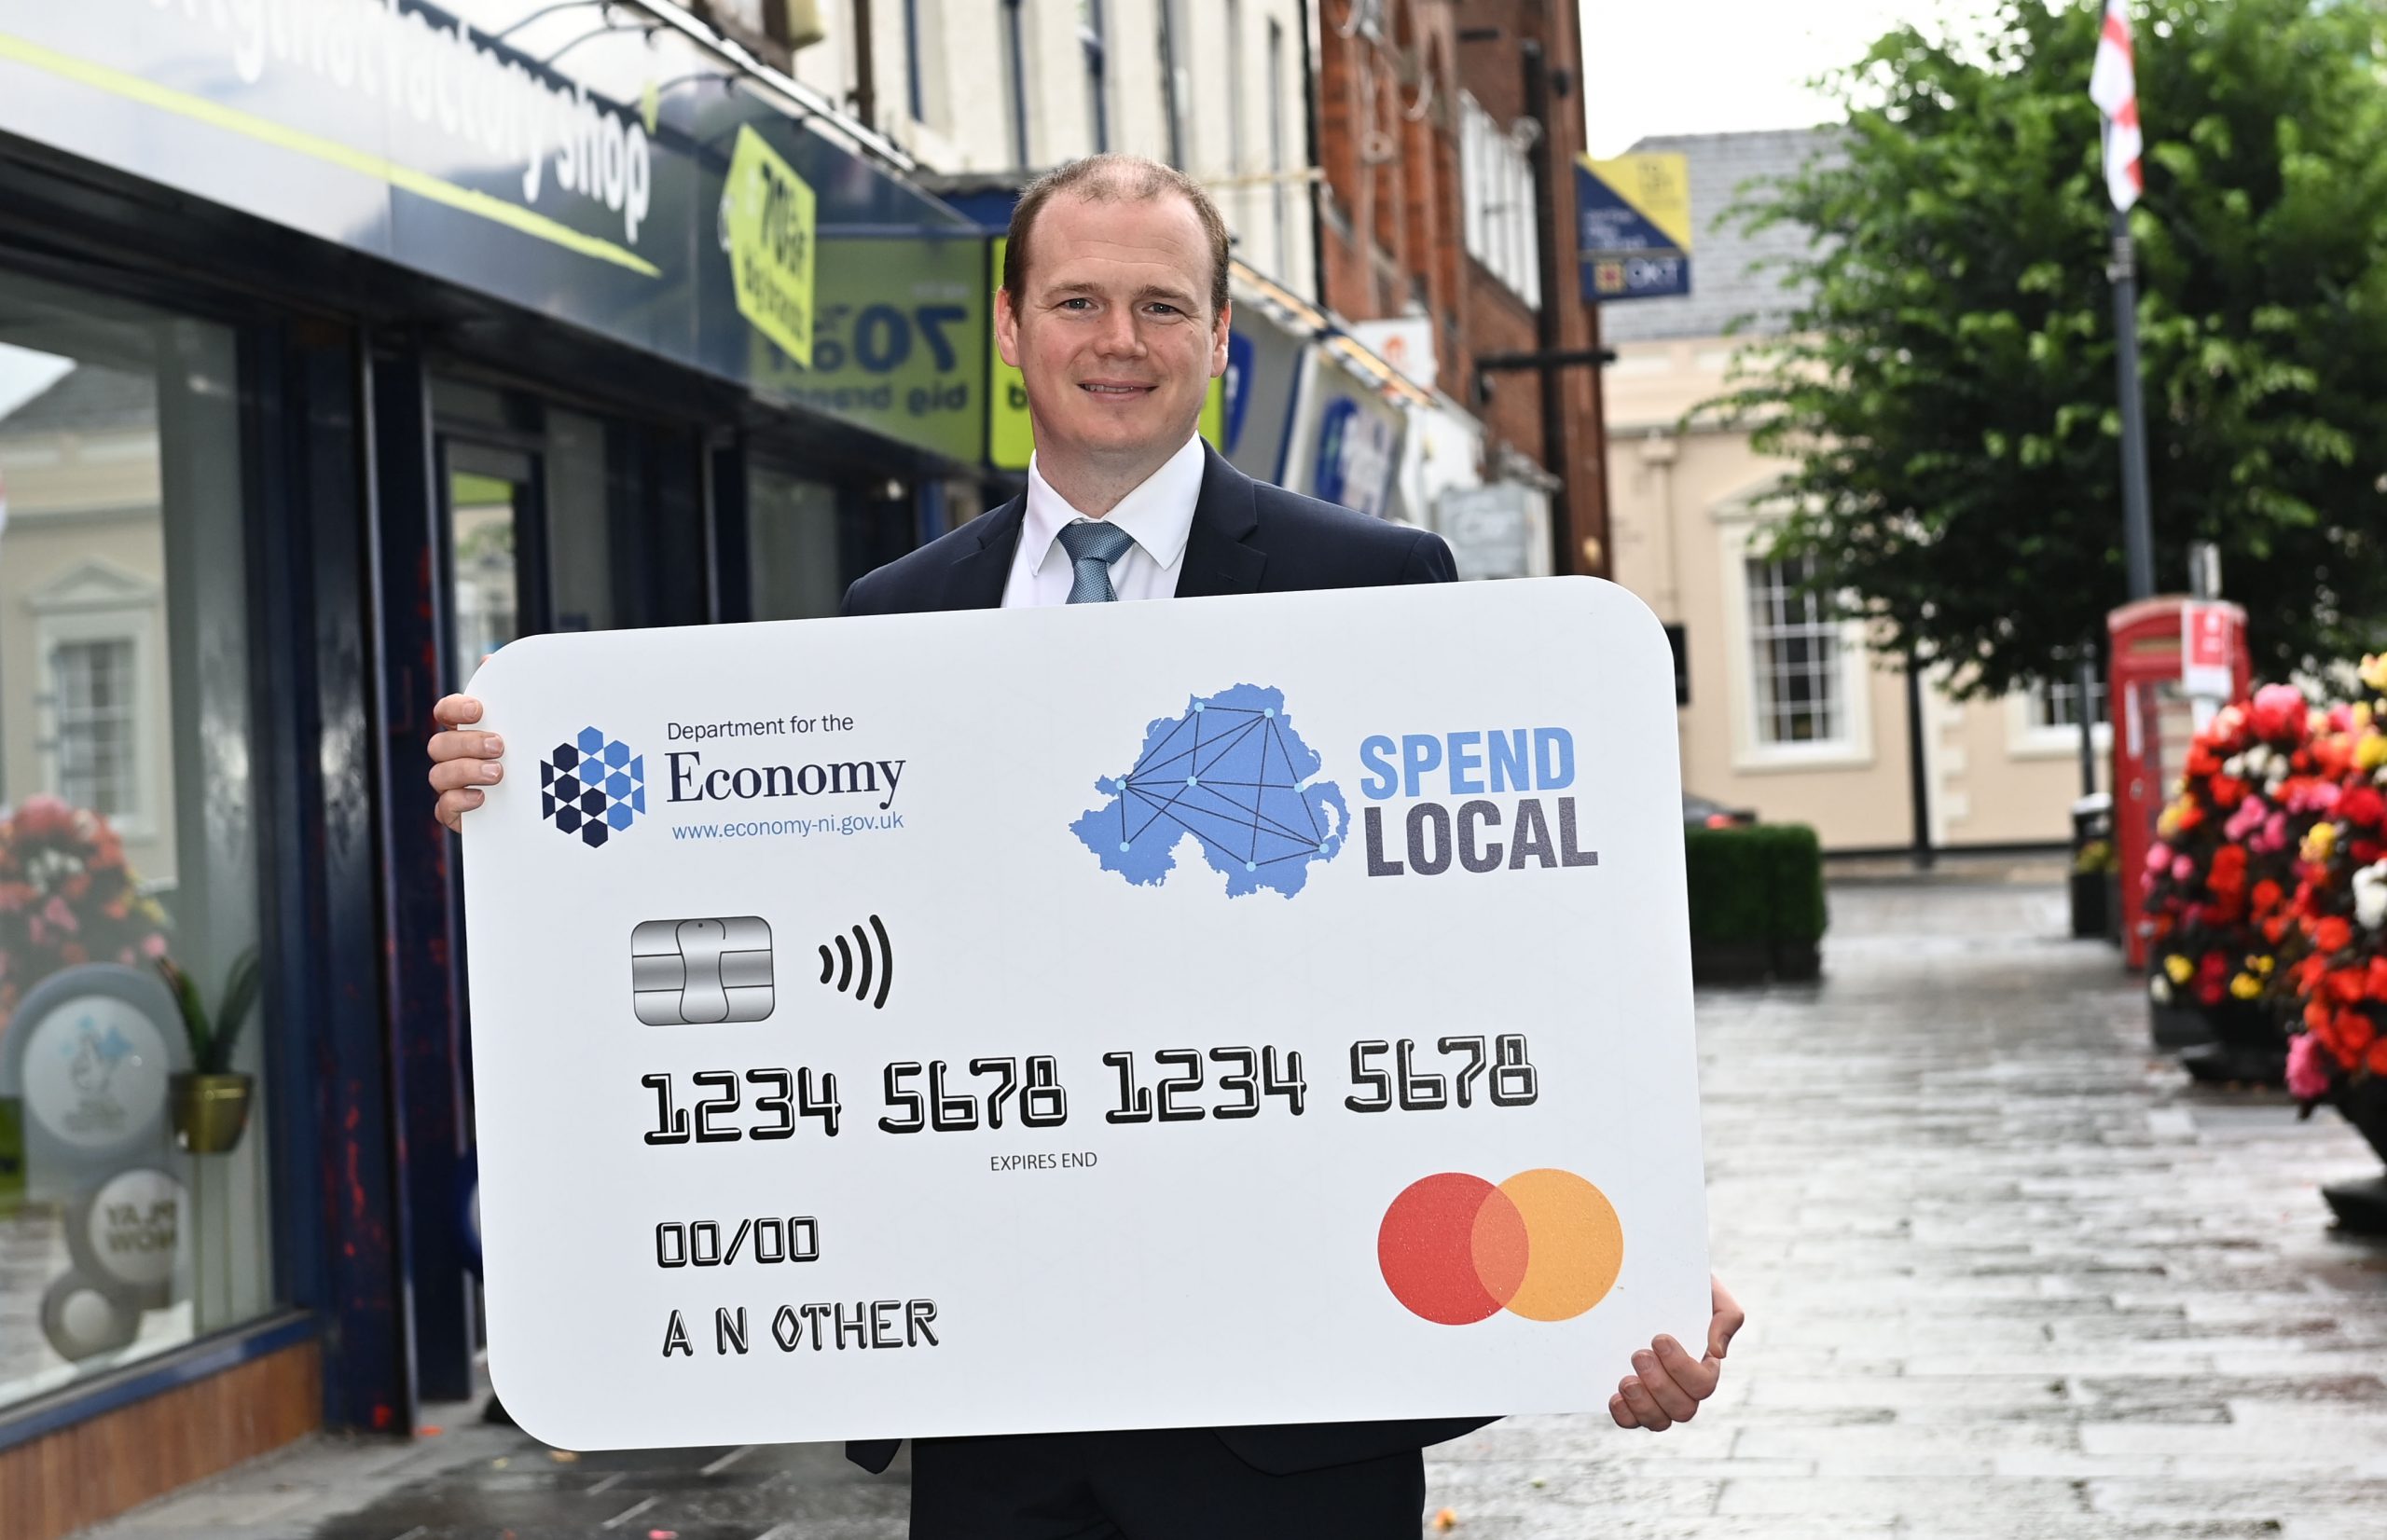 ‘Spend Local’ – Details of High Street Scheme announced by Economy Minister